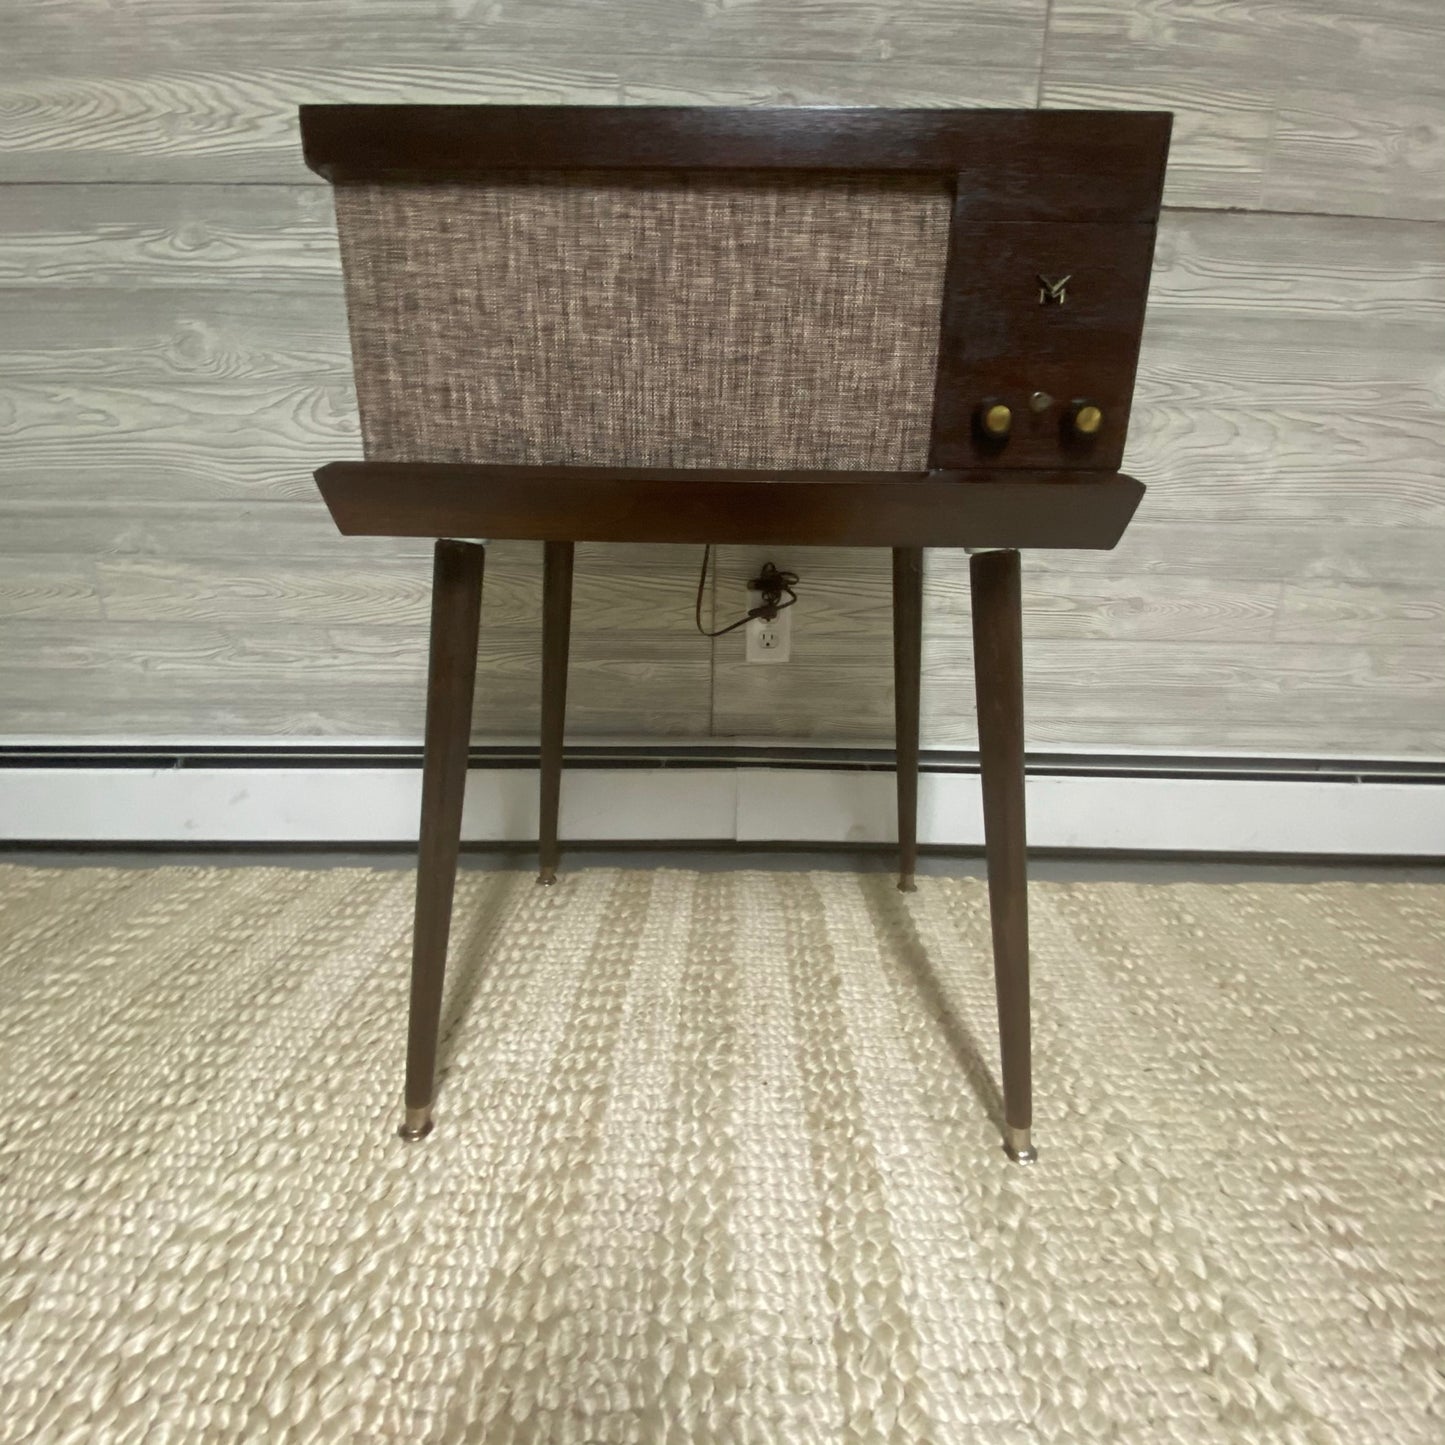 SOLD OUT **** VOICE OF MUSIC 560 **** Vintage 50s HiFi Console Record Player Changer Bluetooth The Vintedge Co.